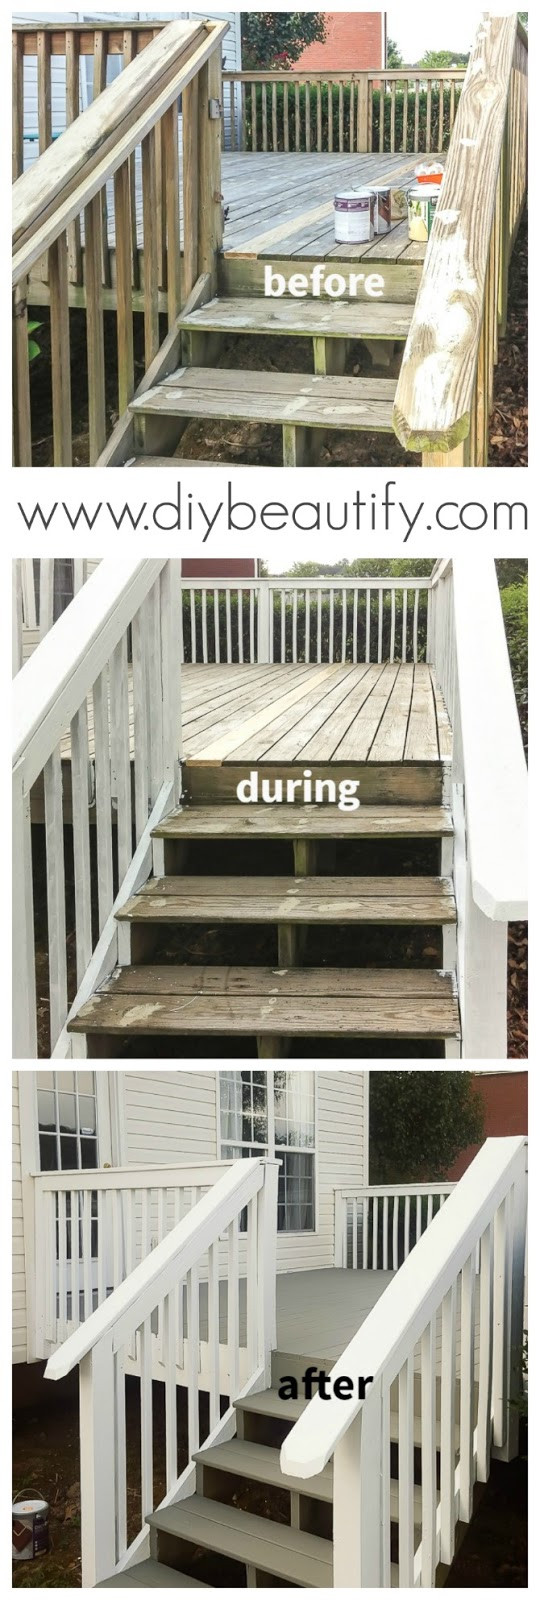 Painted Deck Colors
 How to Update a Deck with Paint